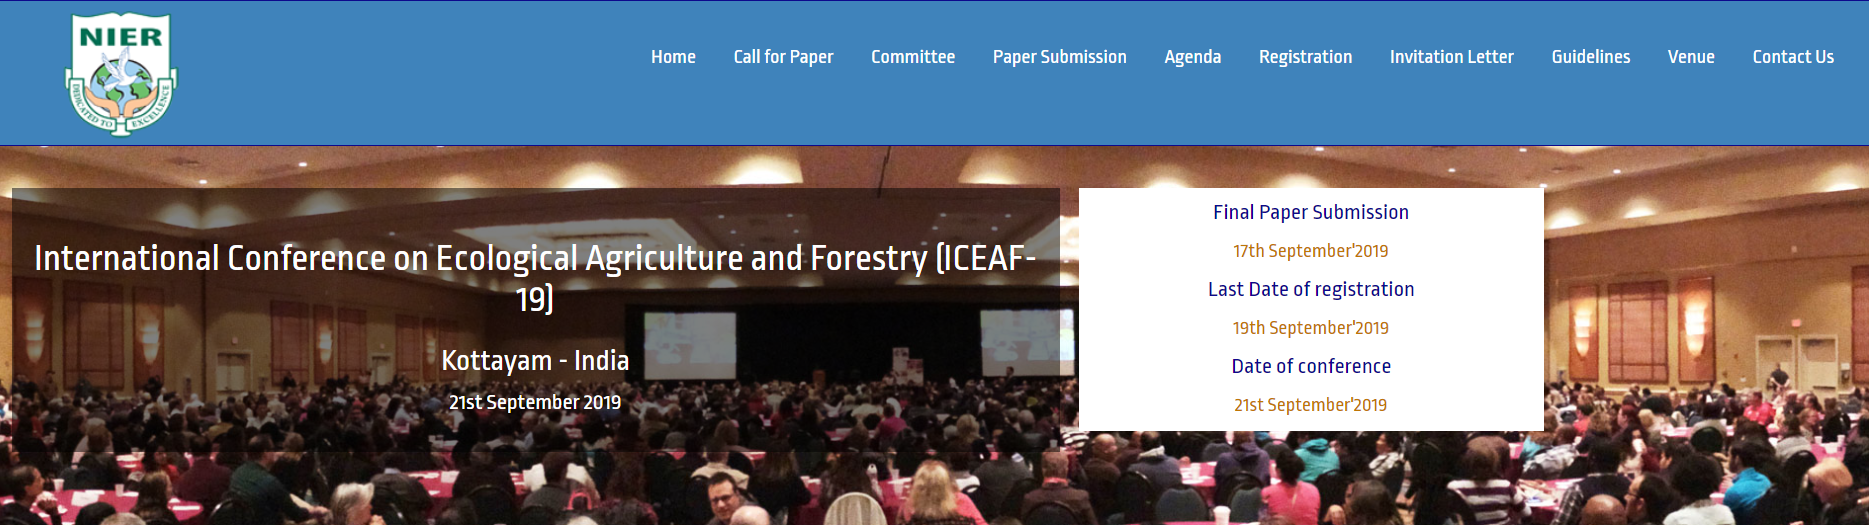 International Conference on Ecological Agriculture and Forestry (ICEAF-19), Kottayam, Kerala, India